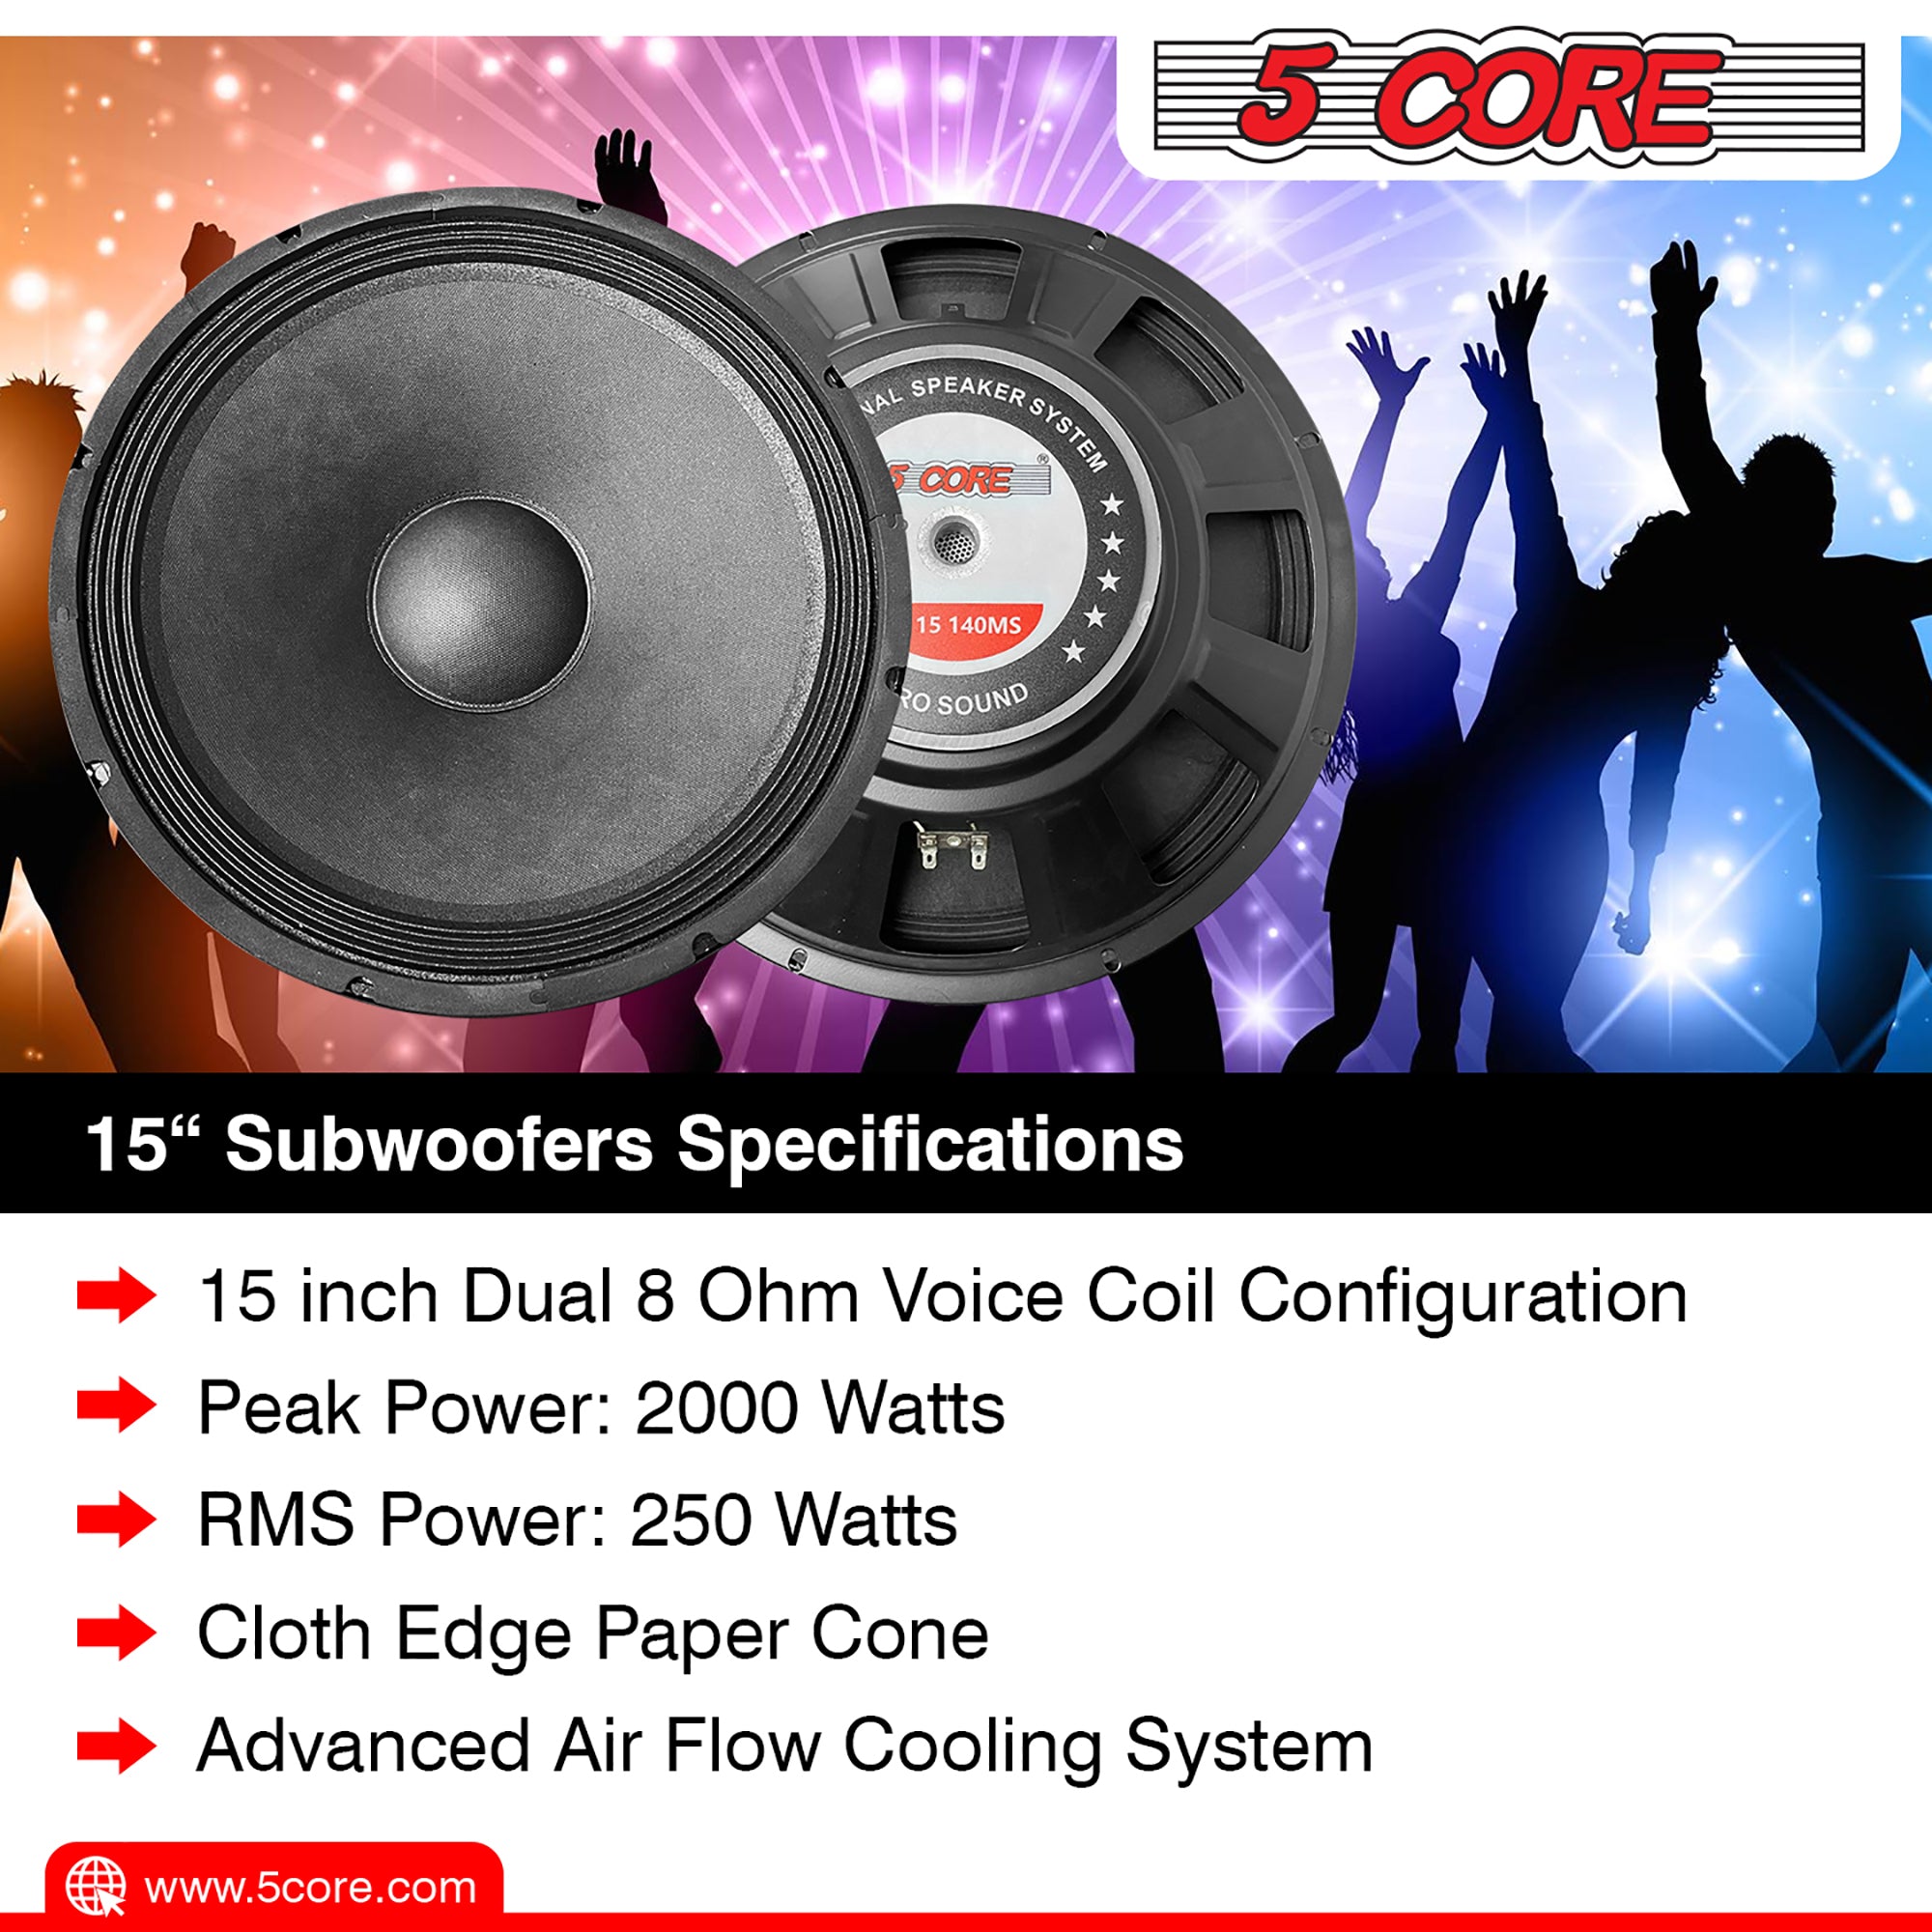 5 Core 15 Inch Subwoofer Speaker 250W RMS Full Range DJ Sub Woofer Systems 8 Ohm 60 OZ Magnet Raw Replacement Stereo Subwoofers -FR 15 140 MS 2PCS